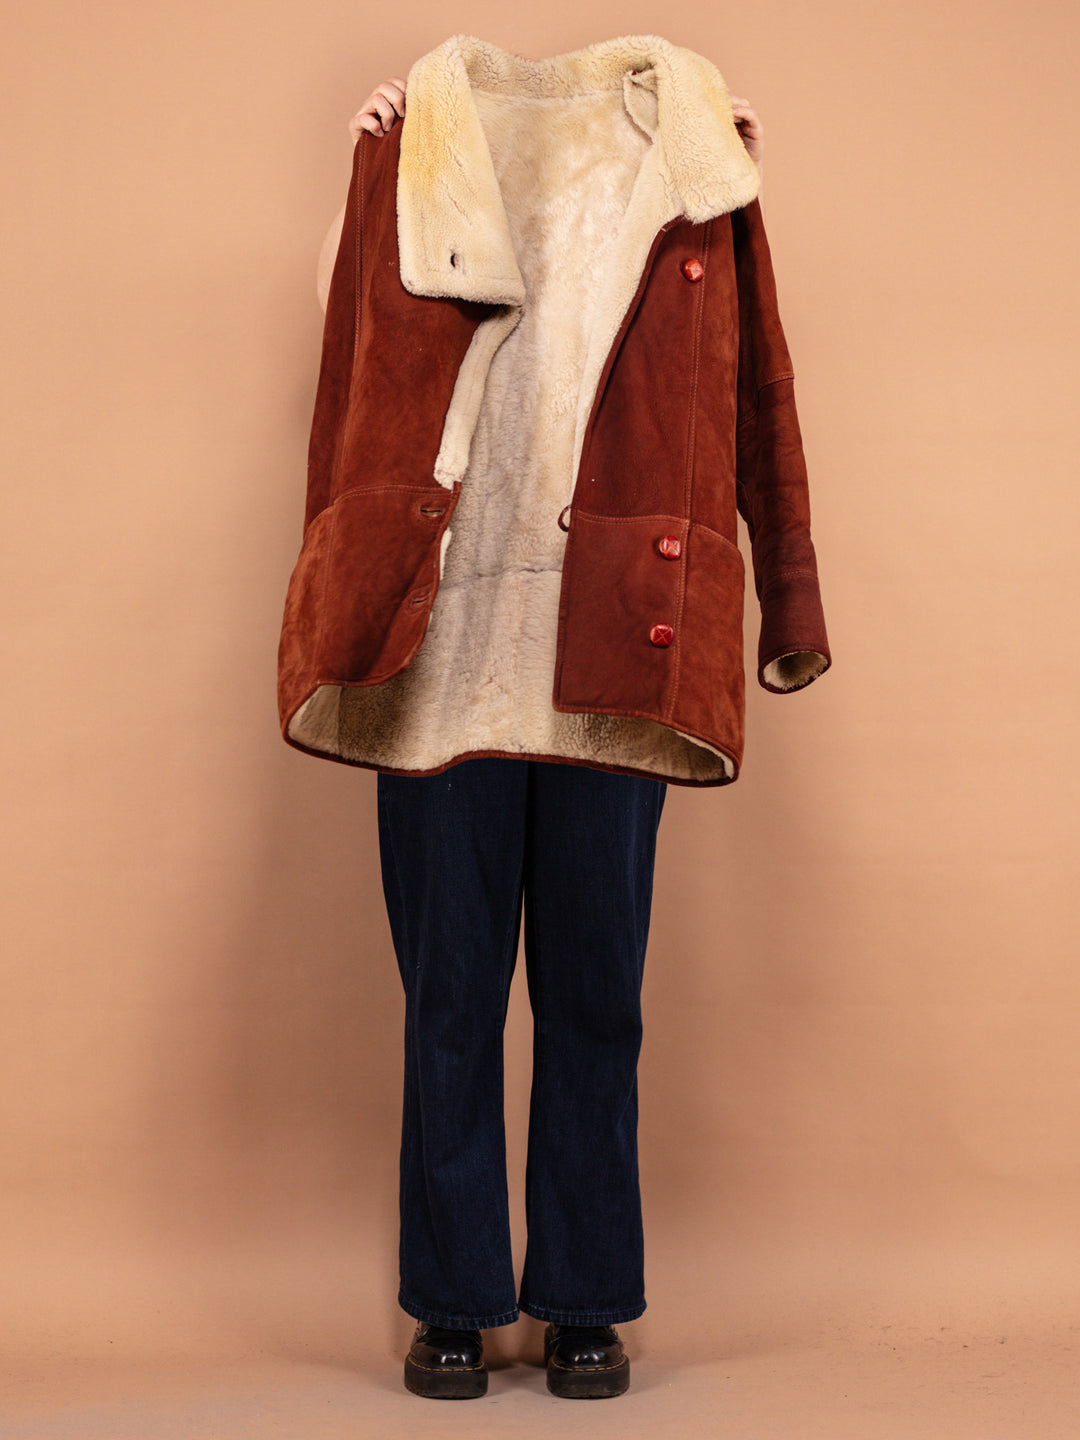 Oversized Shearling Coat, Size XL, Vintage 80s Coat, Women Coat, Brown Shearling Coat, Boho Fashion, Cozy Coat, Cowgirl Coat, Pre Owned